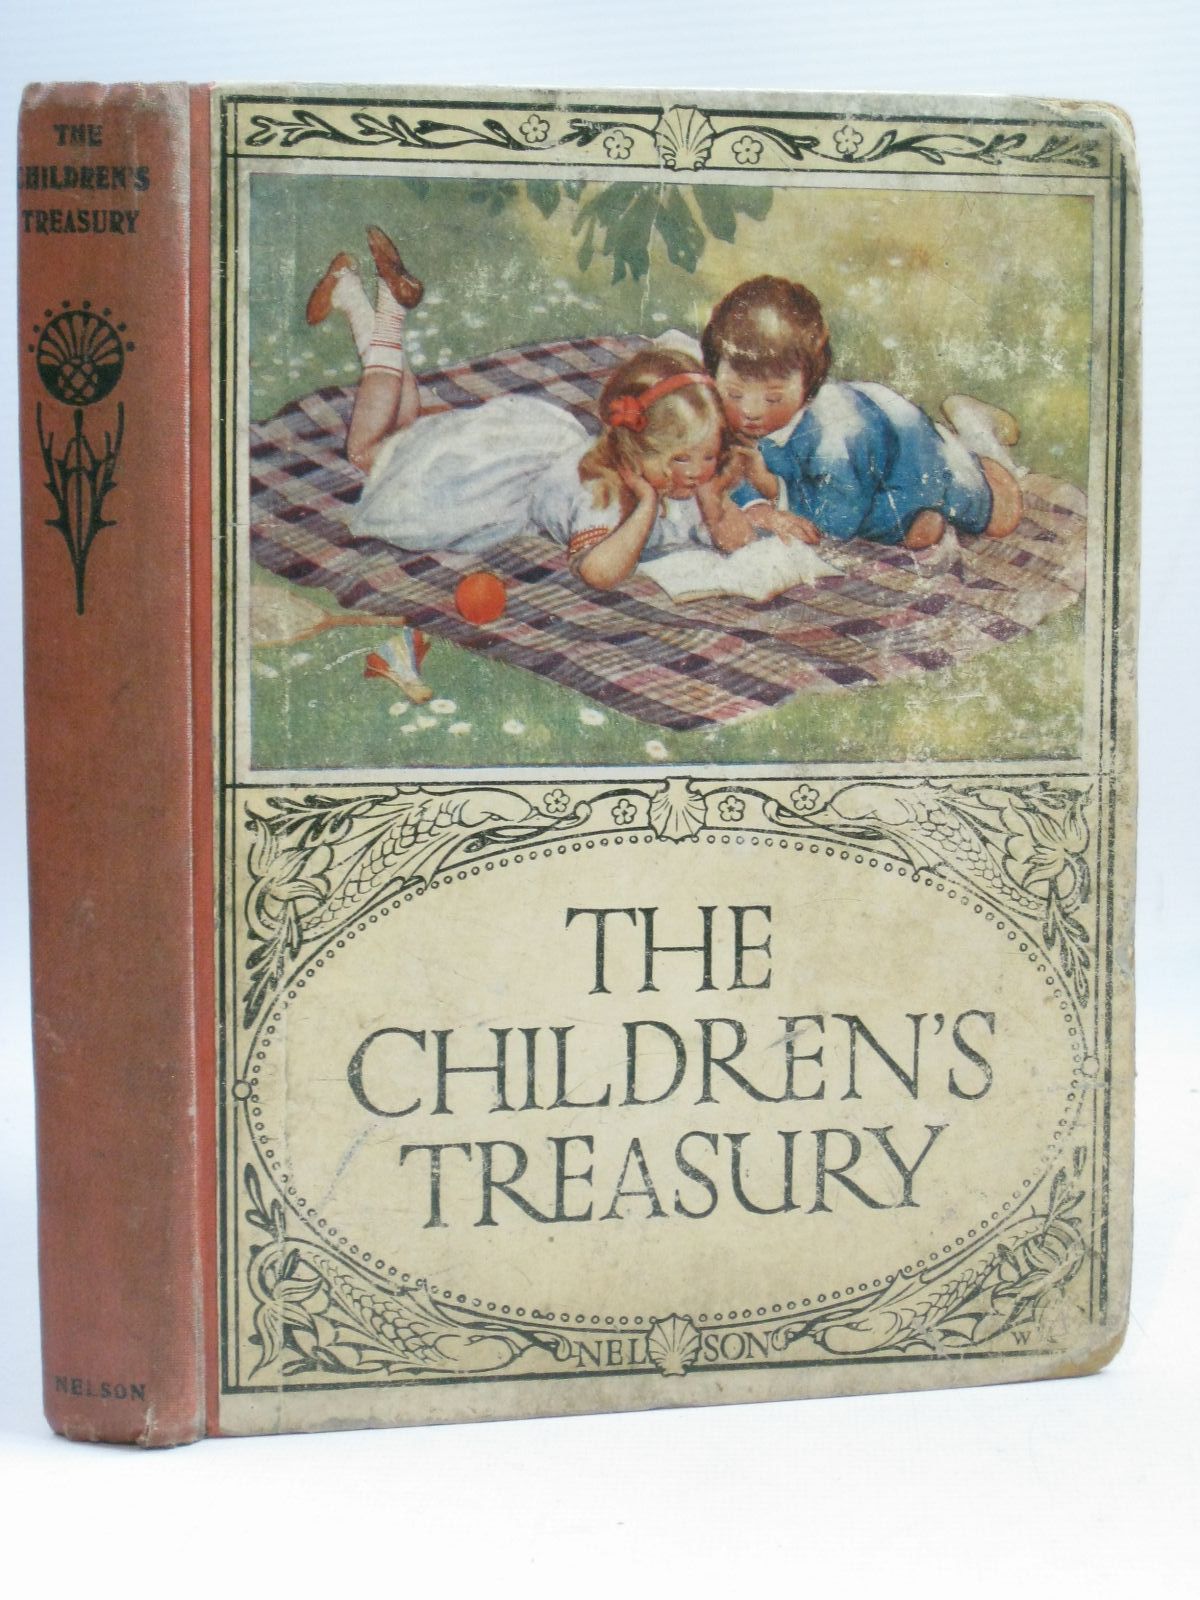 TALBOT, ETHEL & HEWARD, CONSTANCE & QUILLER-COUCH, MABEL & ET AL, ILLUSTRATED BY ANDERSON, ANNE & ET AL., - The Childrens Treasury No. Xxii